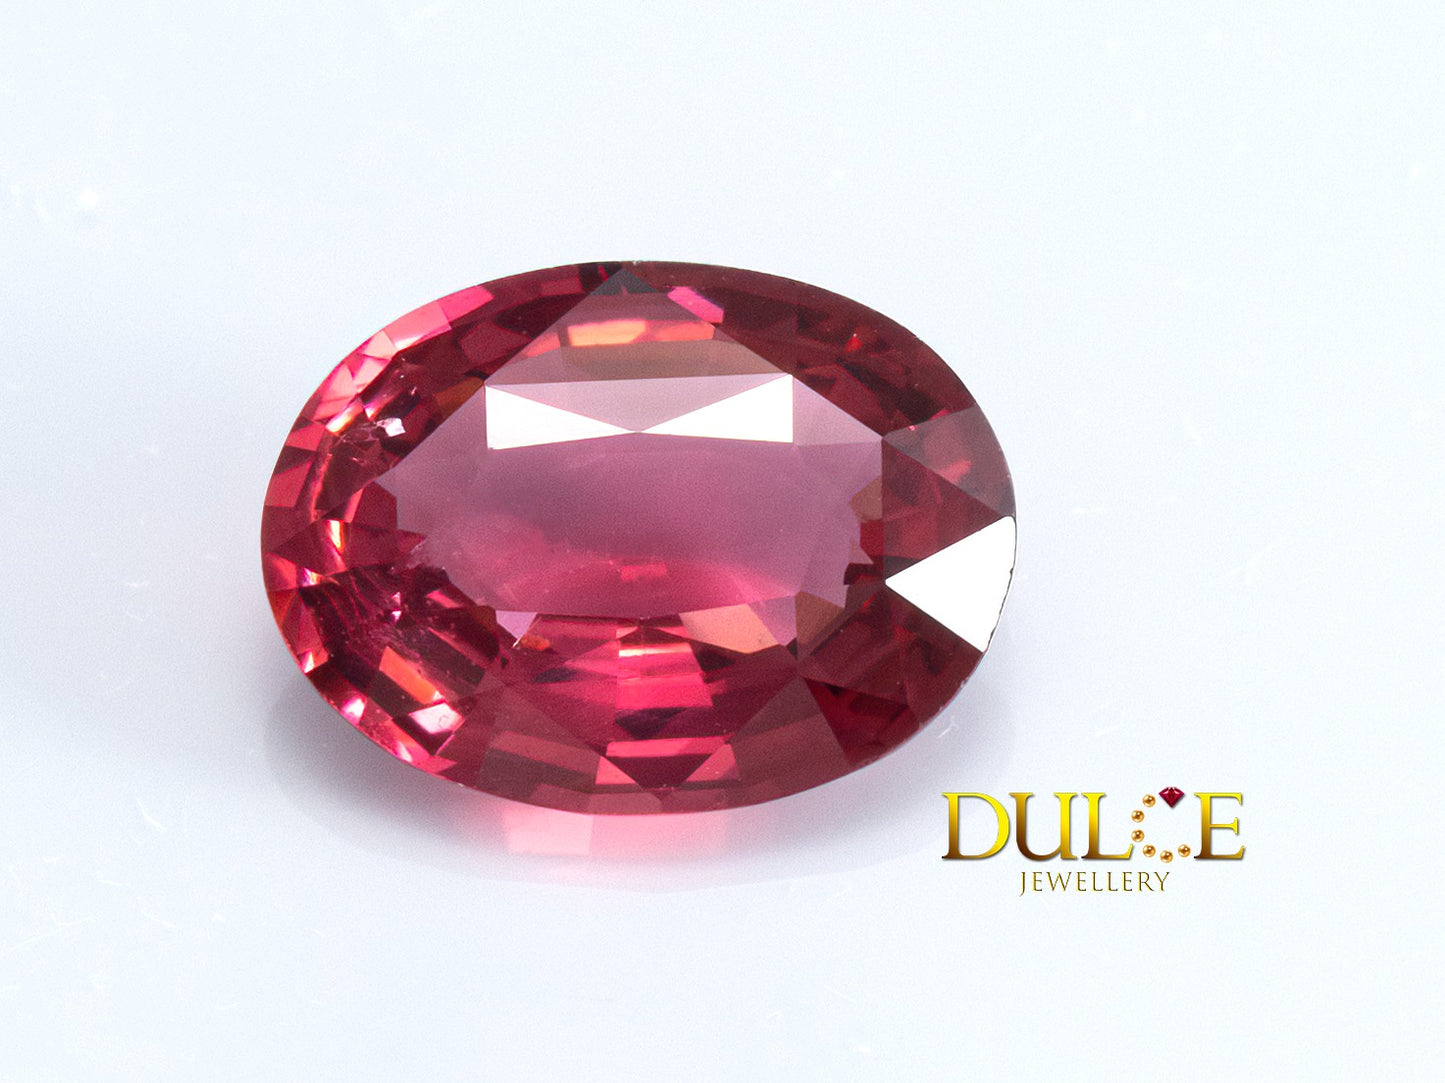 Red Spinel (Price by Request)